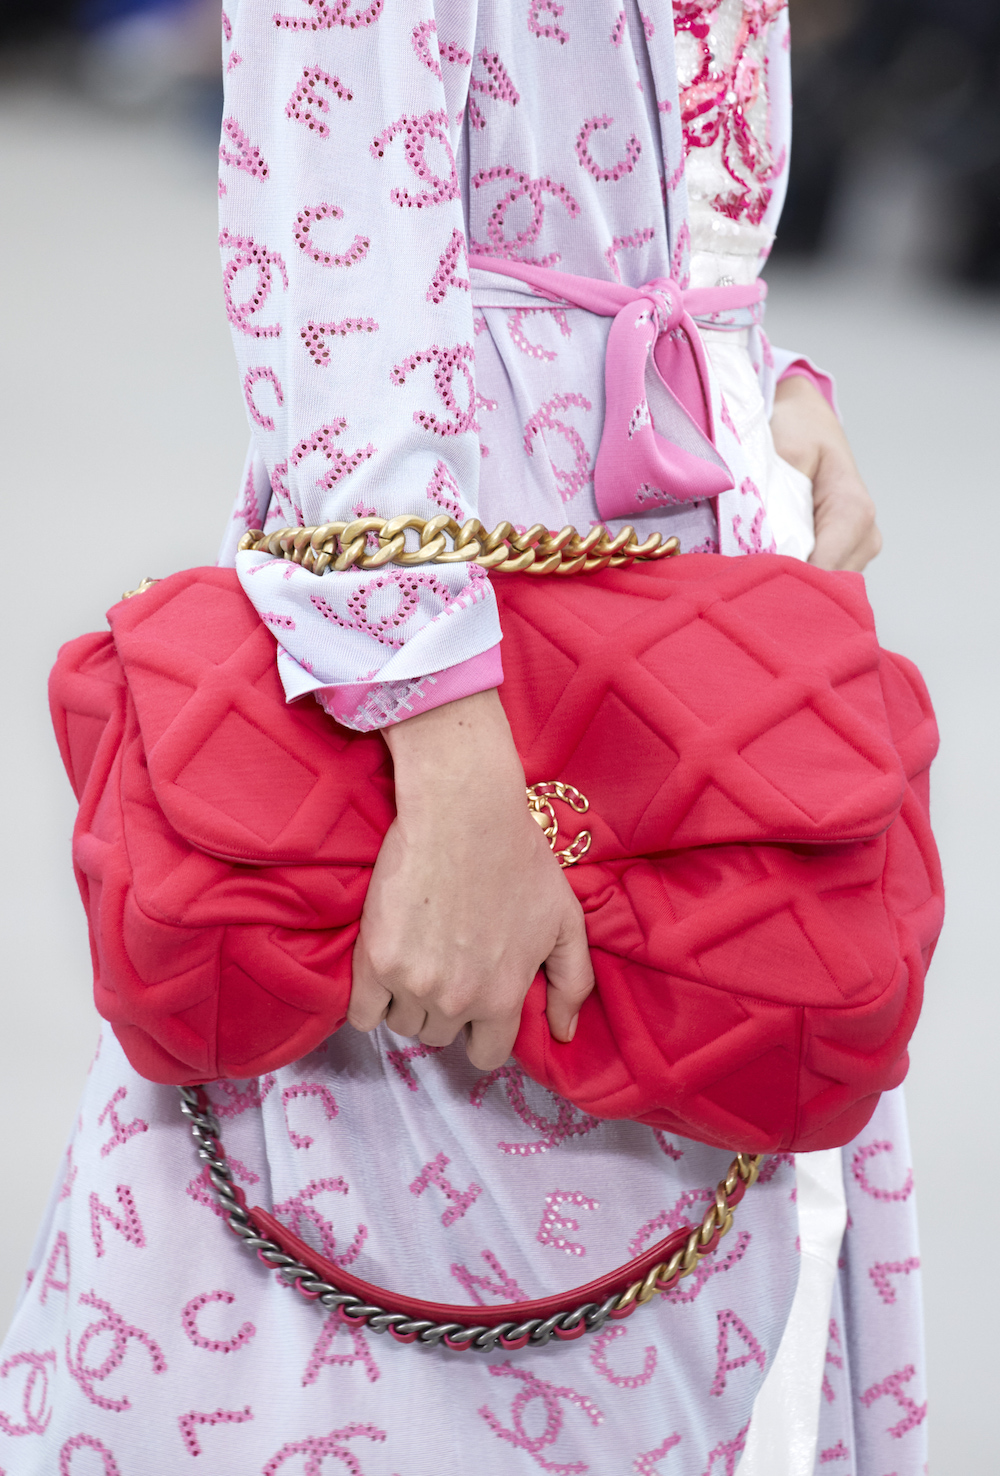 The Chanel 19 Bag: Introducing Chanel's Latest Accessory - V Magazine